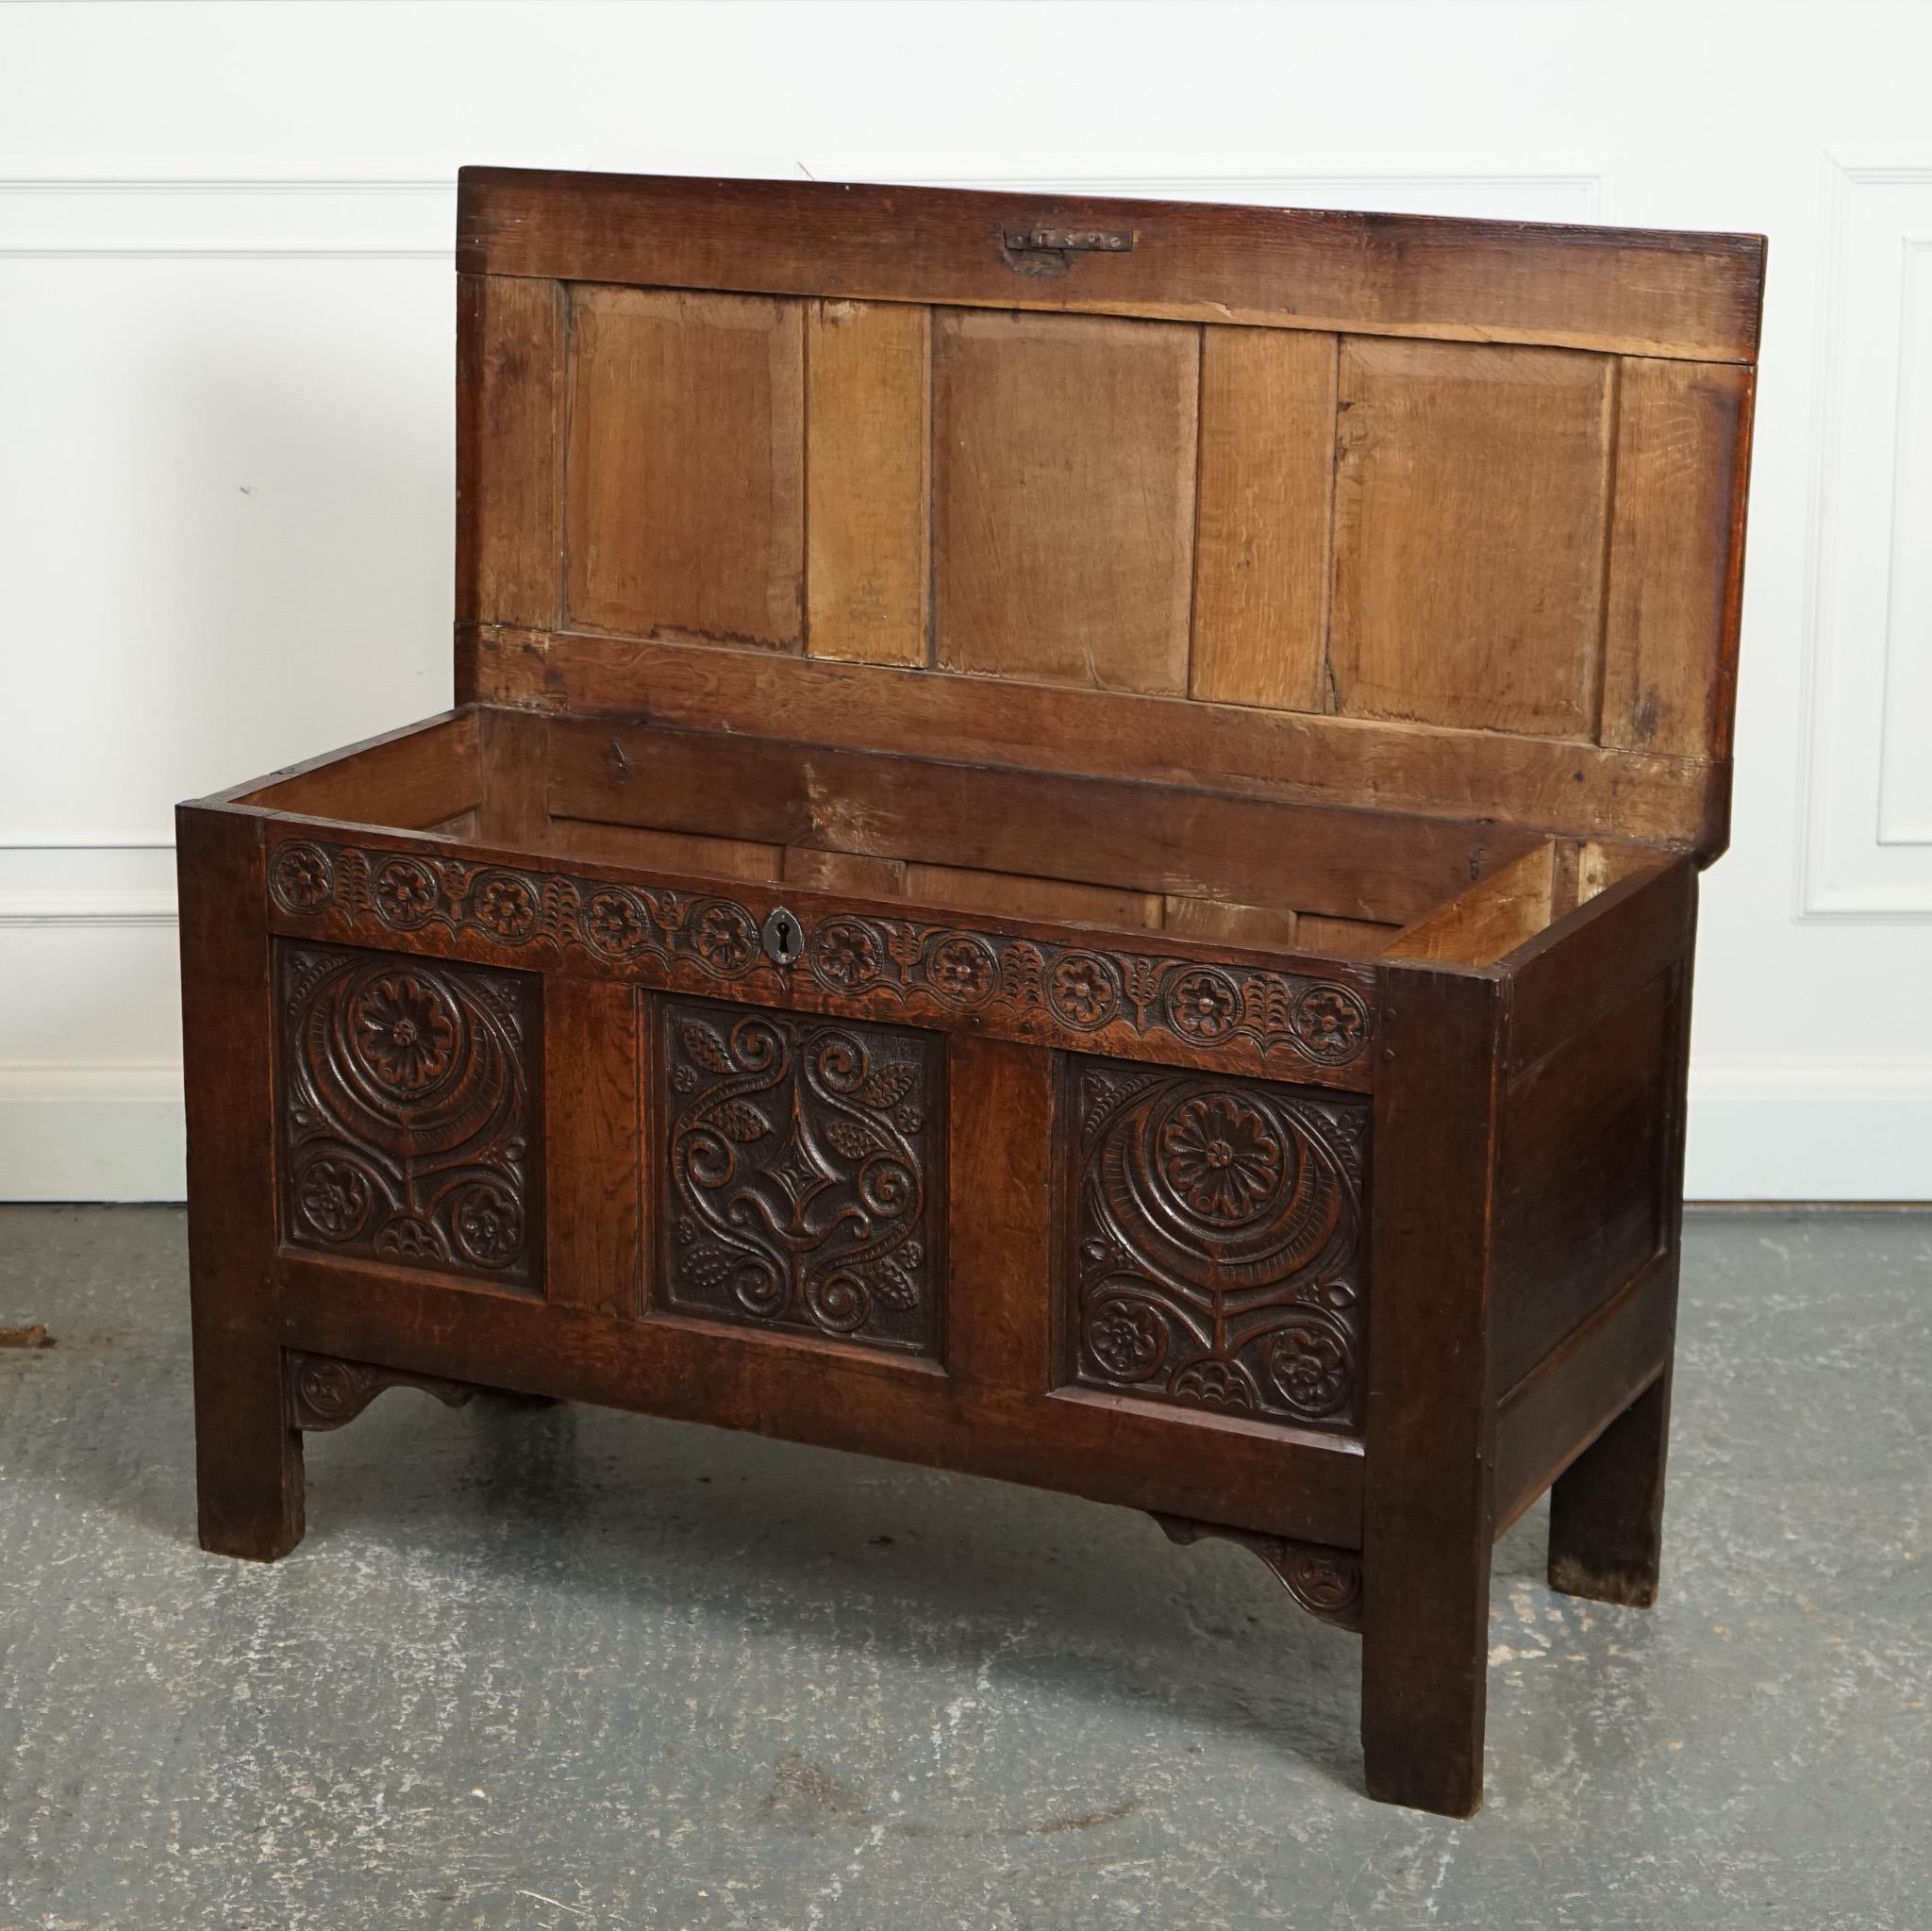 British LOVELY 17TH CENTURY CARVED ANTIQUE OAK TRUNK CHEST COFFER j1 For Sale